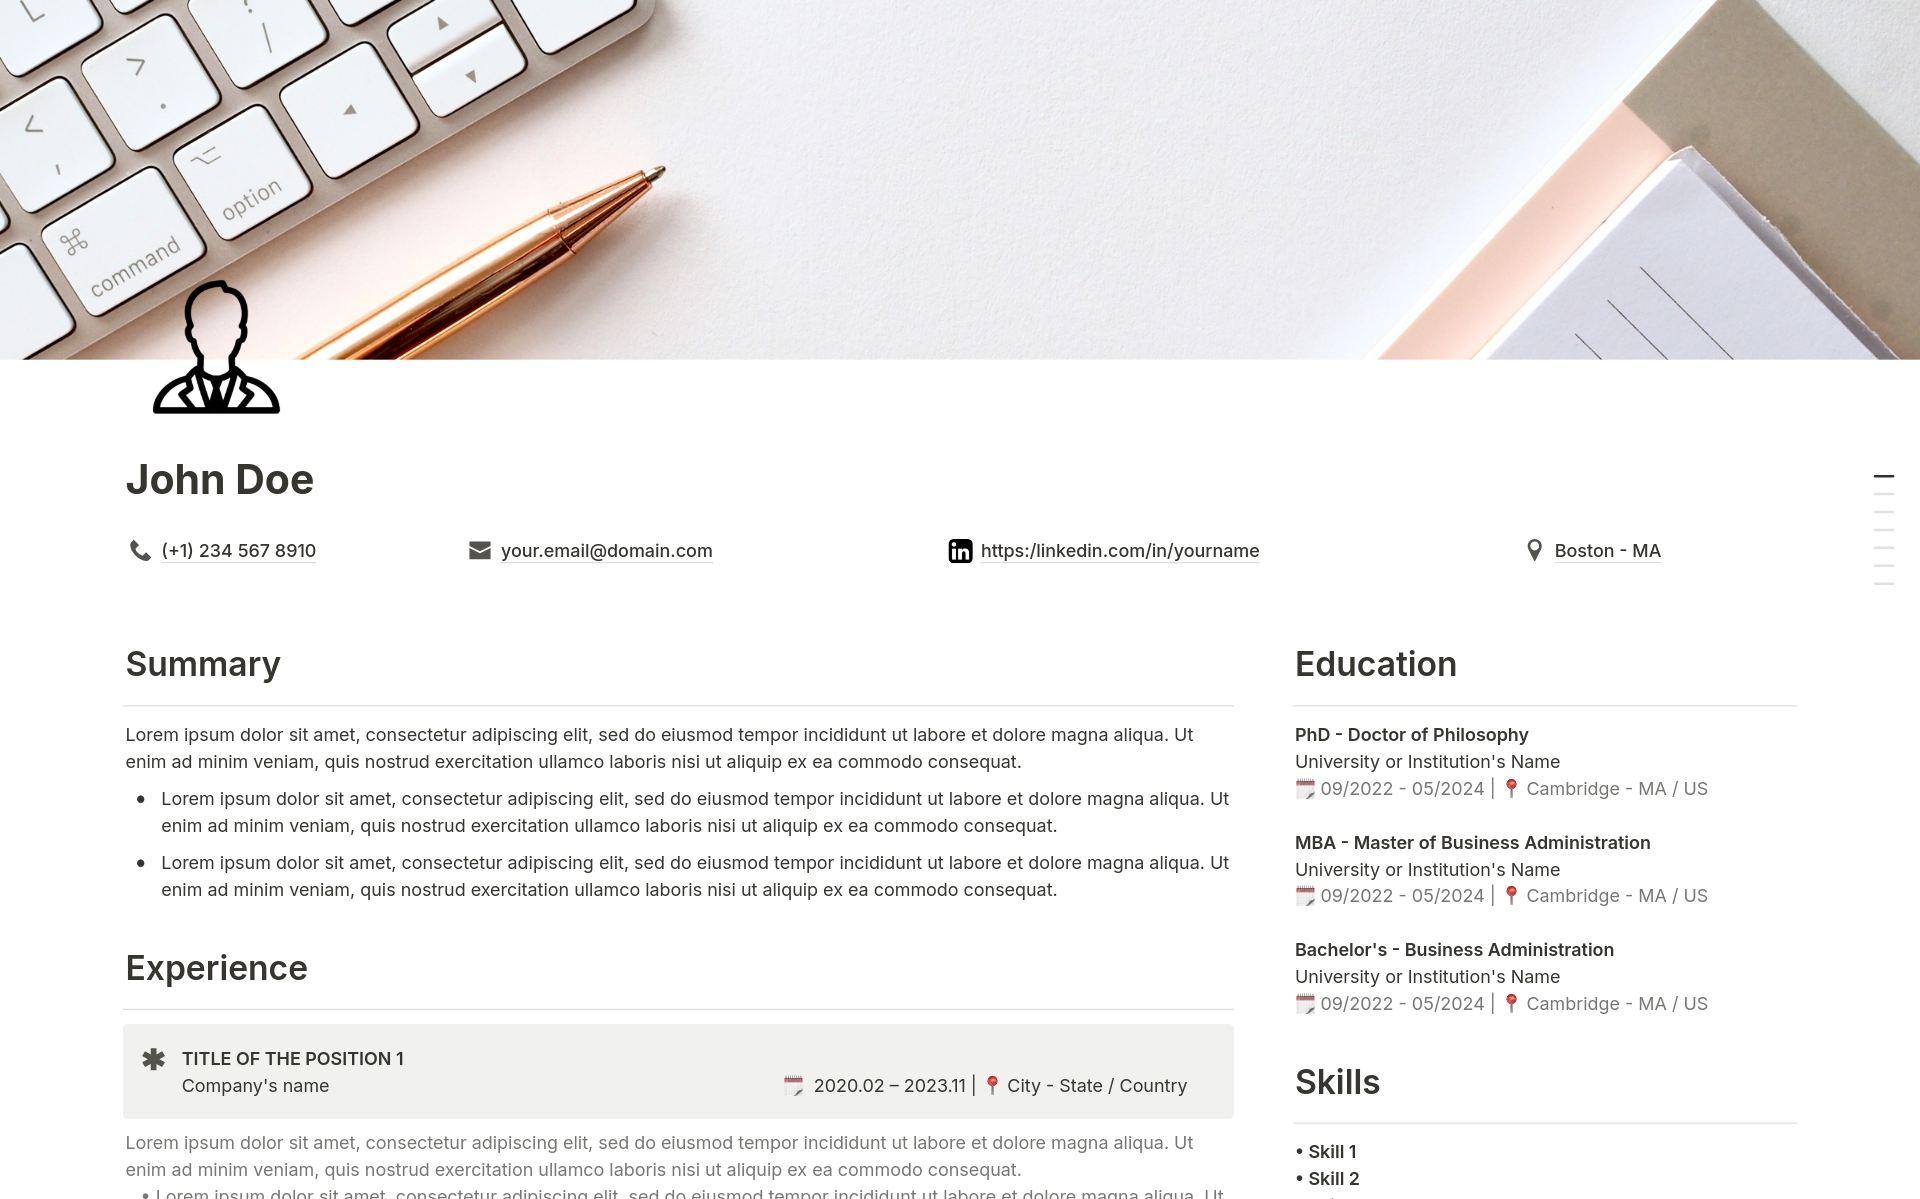 Elevate Your Executive Presence: The Ultimate Notion Resume Template

Are you a seasoned professional aiming for C-suite positions, VP roles, or board seats? Your resume is your first impression – make it impeccable with this meticulously crafted Notion template.